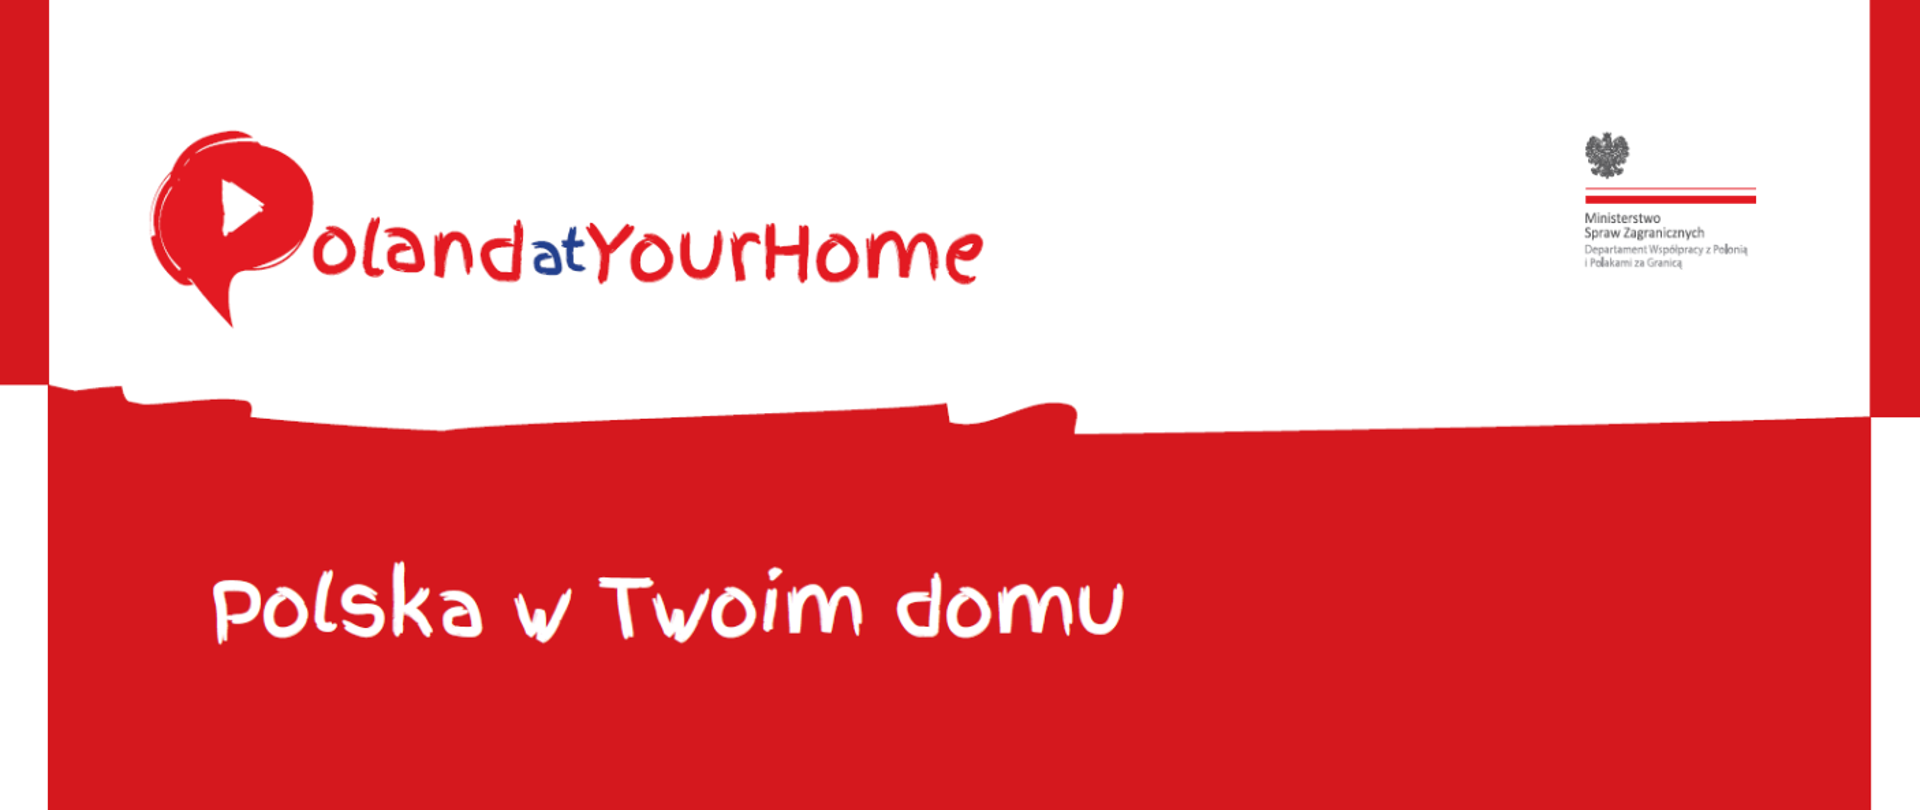 Poland at Your Home